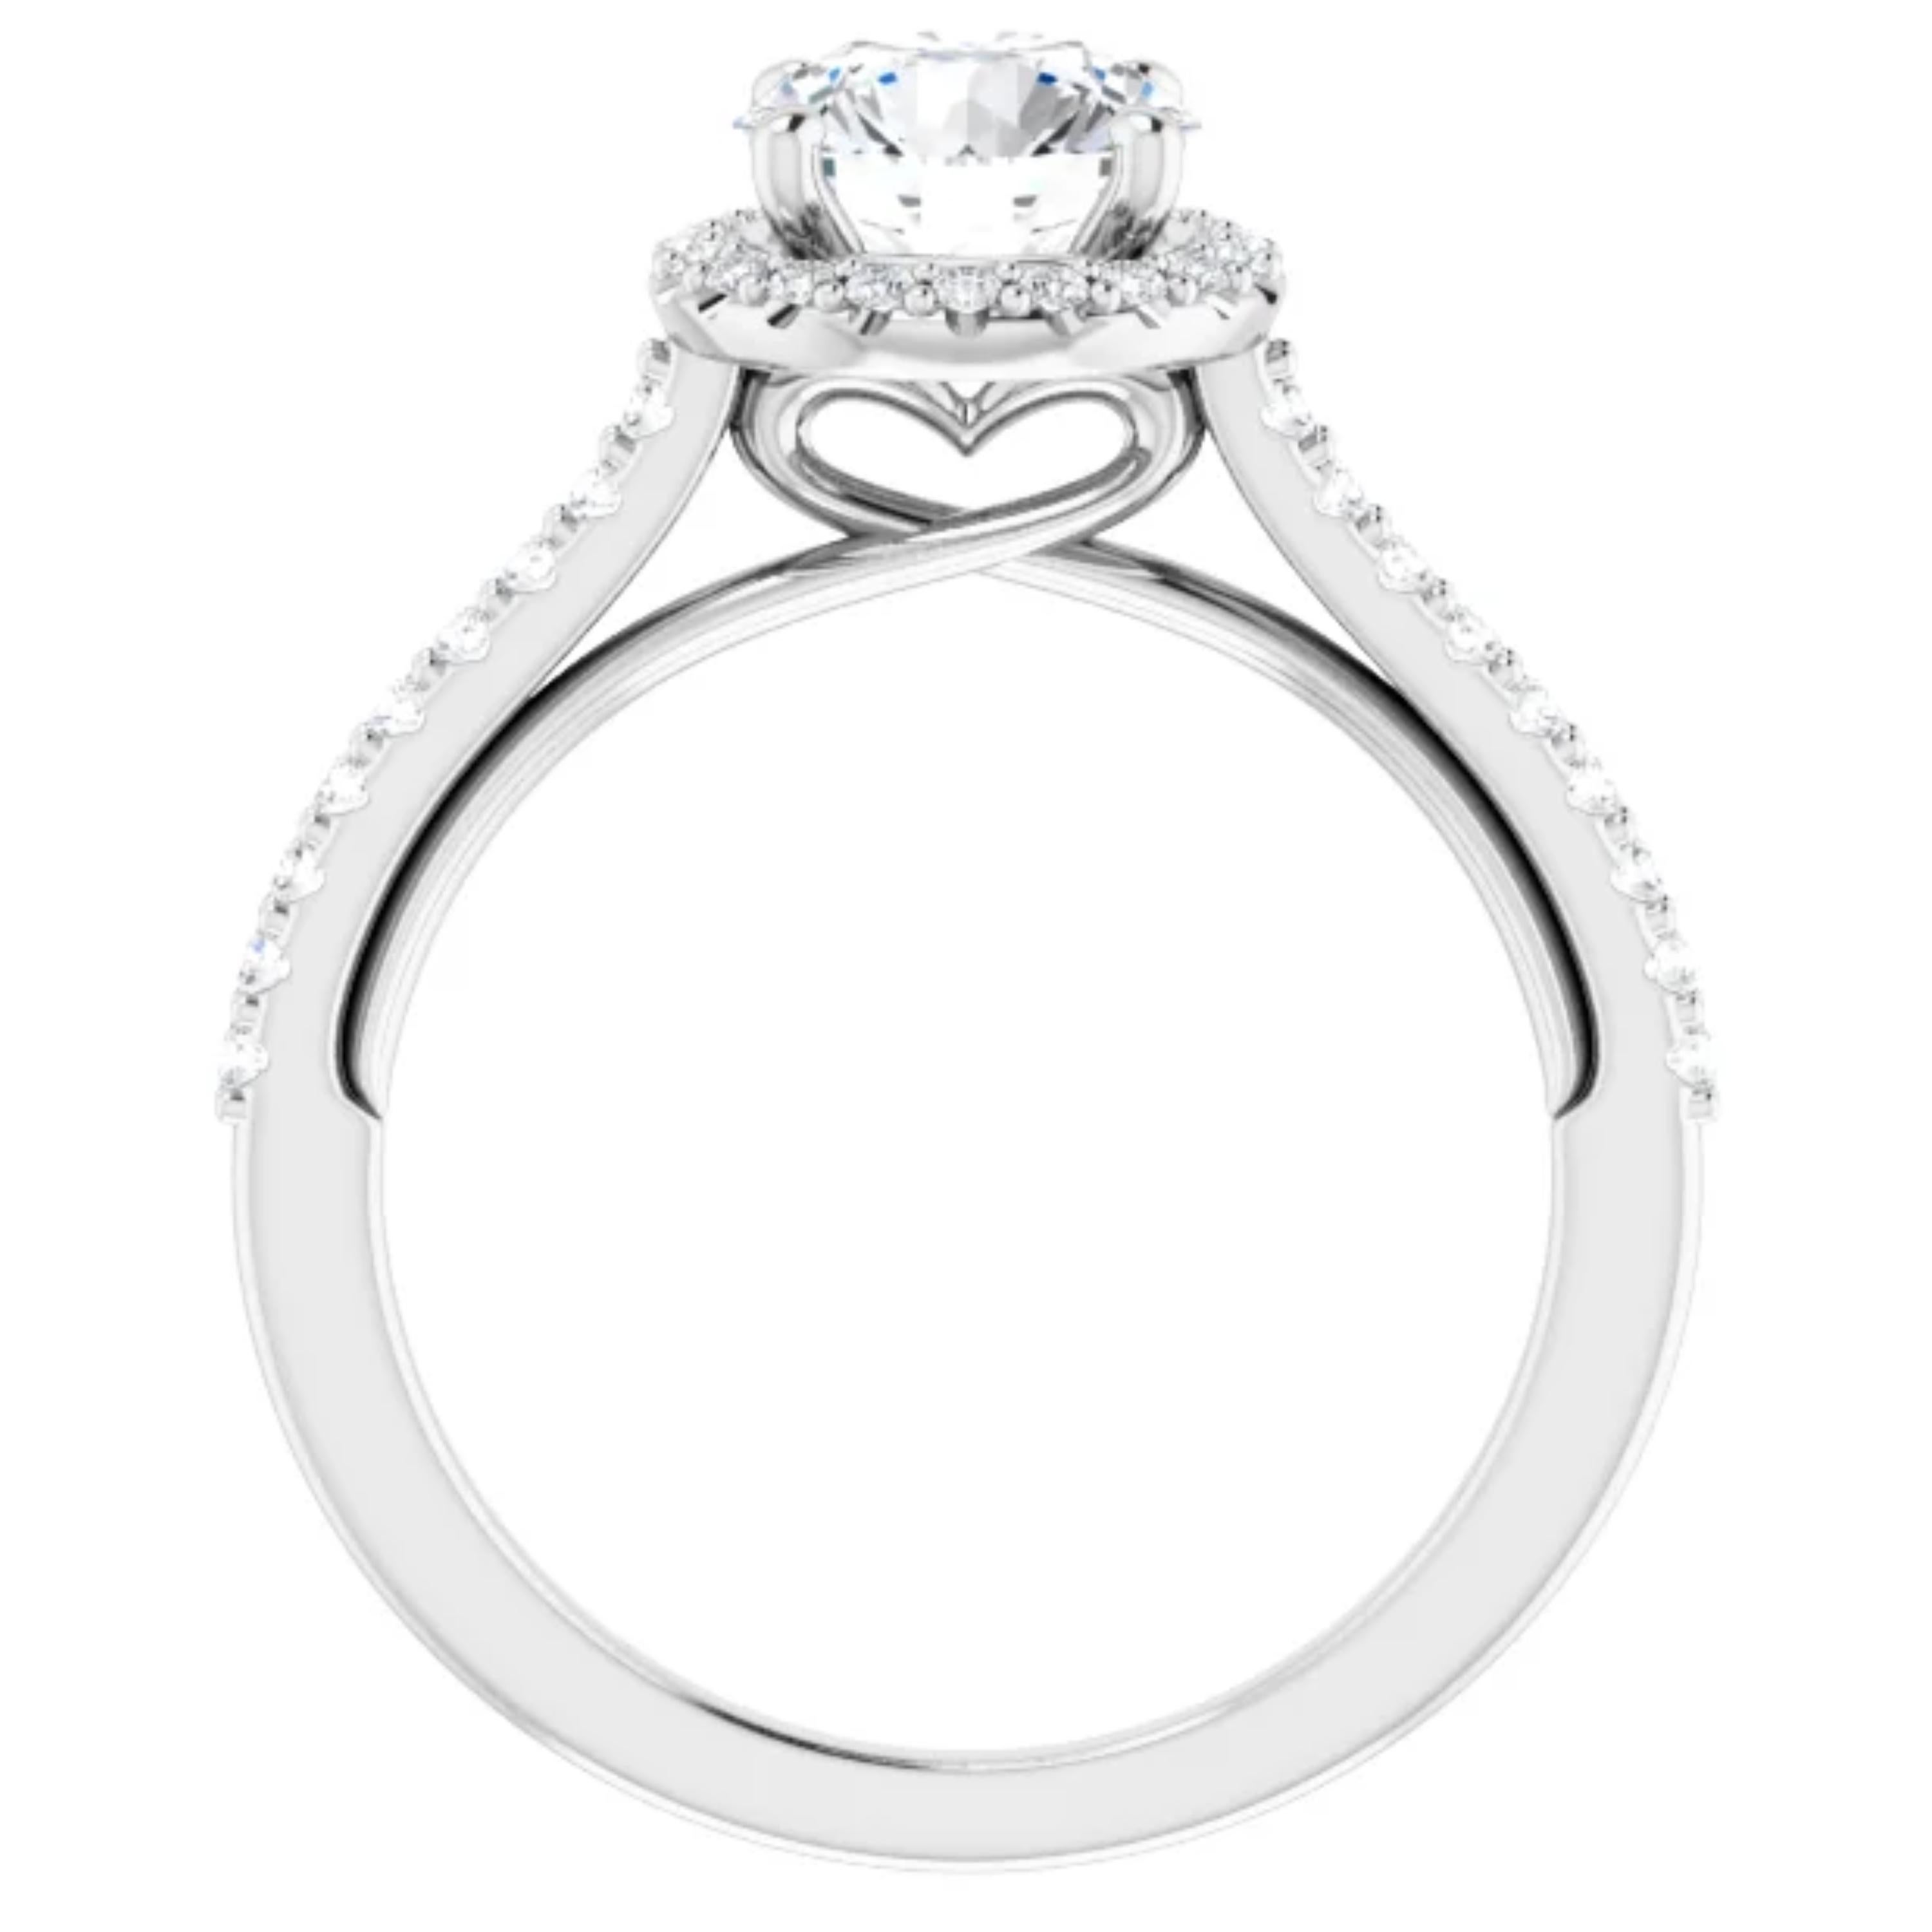 Contemporary Hidden Heart Halo GIA Round Brilliant White Diamond Engagement Ring 1.15 Carat For Sale